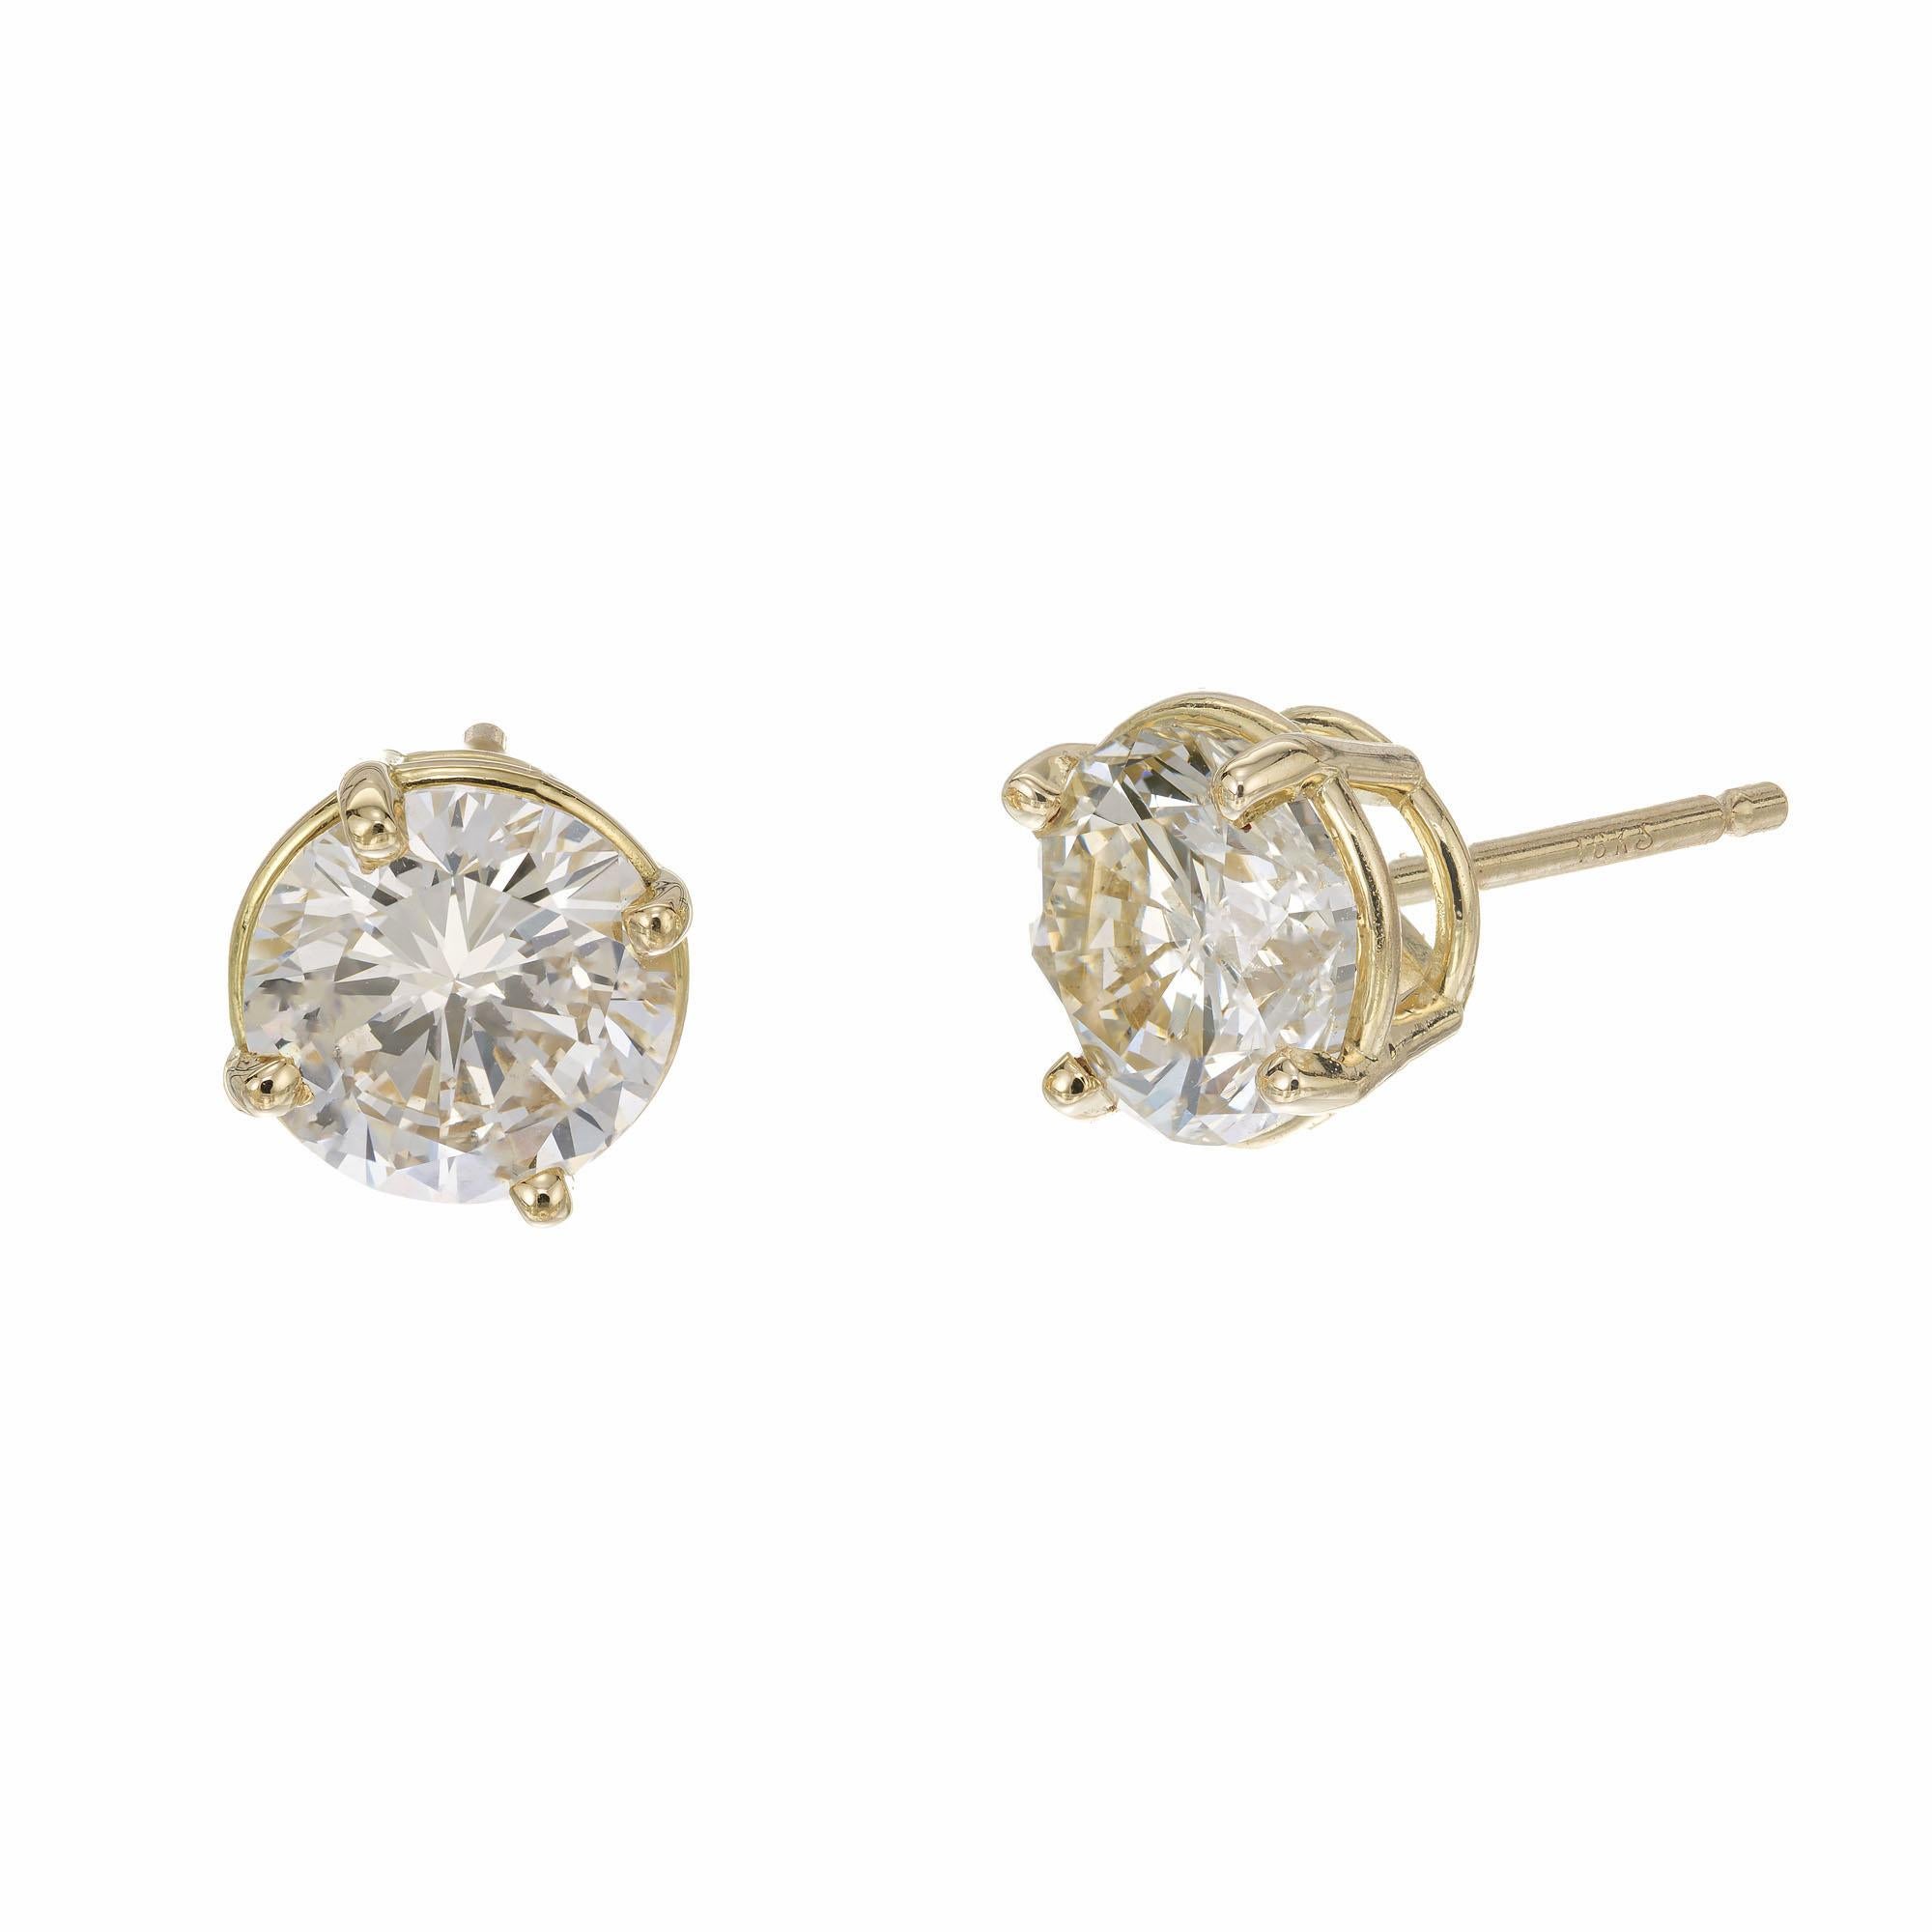 Diamond stud earrings. 2 round brilliant cut diamonds in 18k yellow gold basket settings. The diamonds are from a 1940's estate. Designed and crafted in the Peter Suchy Workshop.

1 round brilliant cut diamond, K-L SI3 approx. 1.01cts EGL